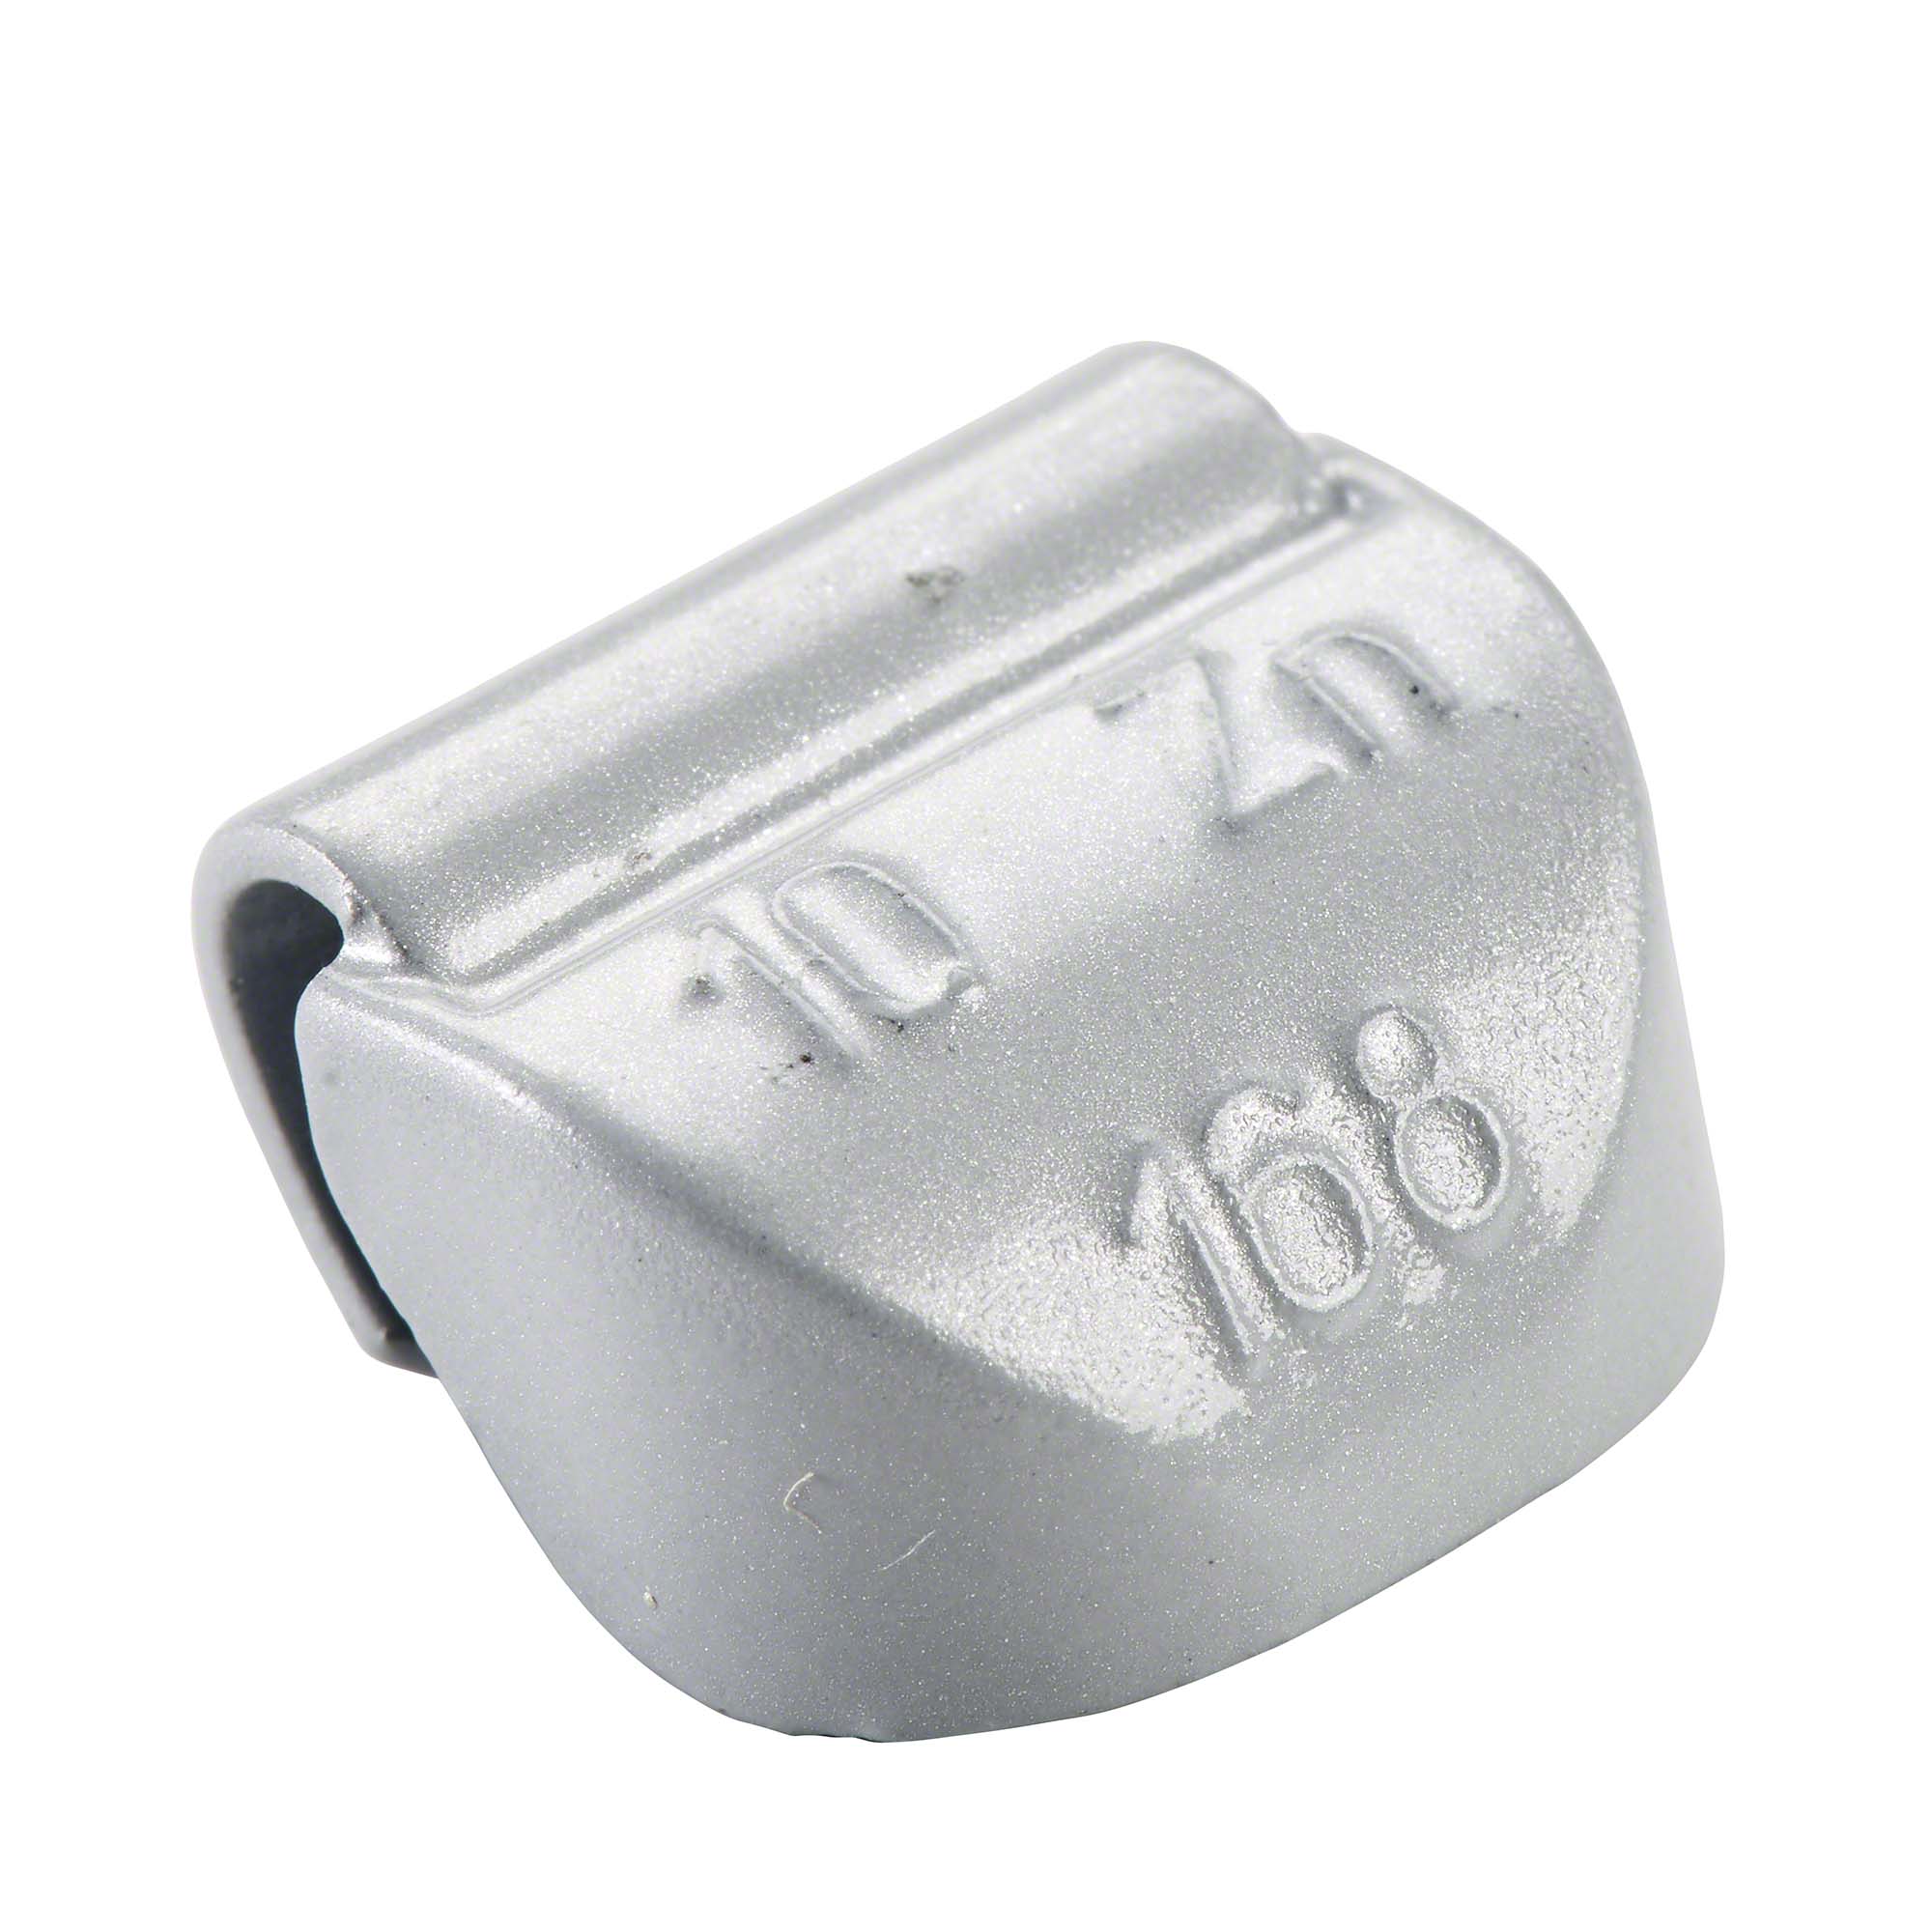 knock-on weight - Typ 168, 10 g, zinc, silver